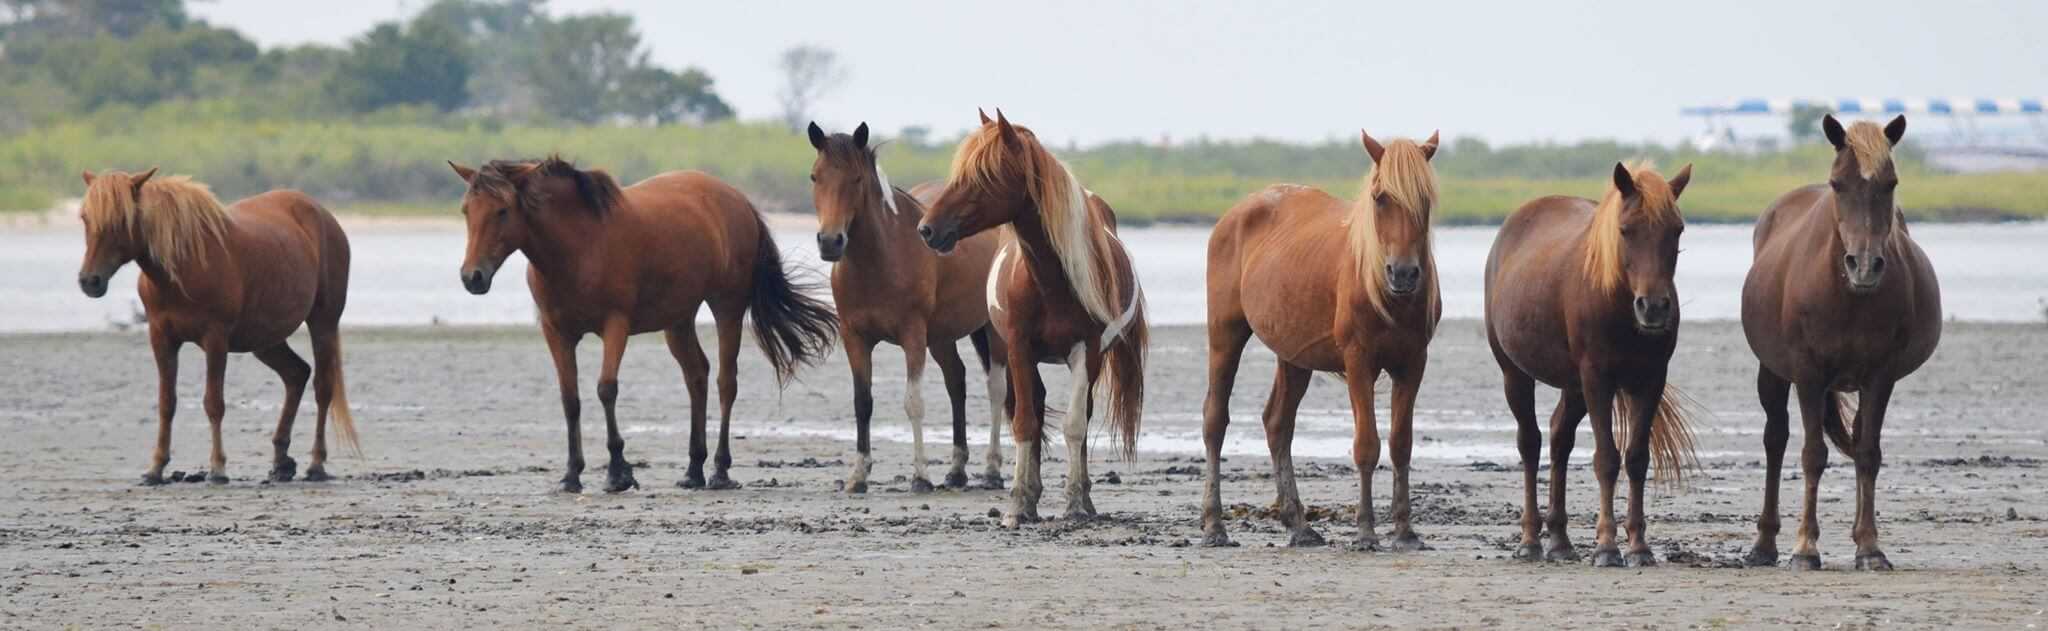 Image: From left - M2EINR-B (Rohan), N2BHS-E (Eve), N2BHS-H (Patricia Irene) these two are sisters, M6MS-G (Chestnut), M2EINRY (Larry), M17GMV (Little Paka), M2EINS (unnamed mare). Source: Assateague Island Alliance